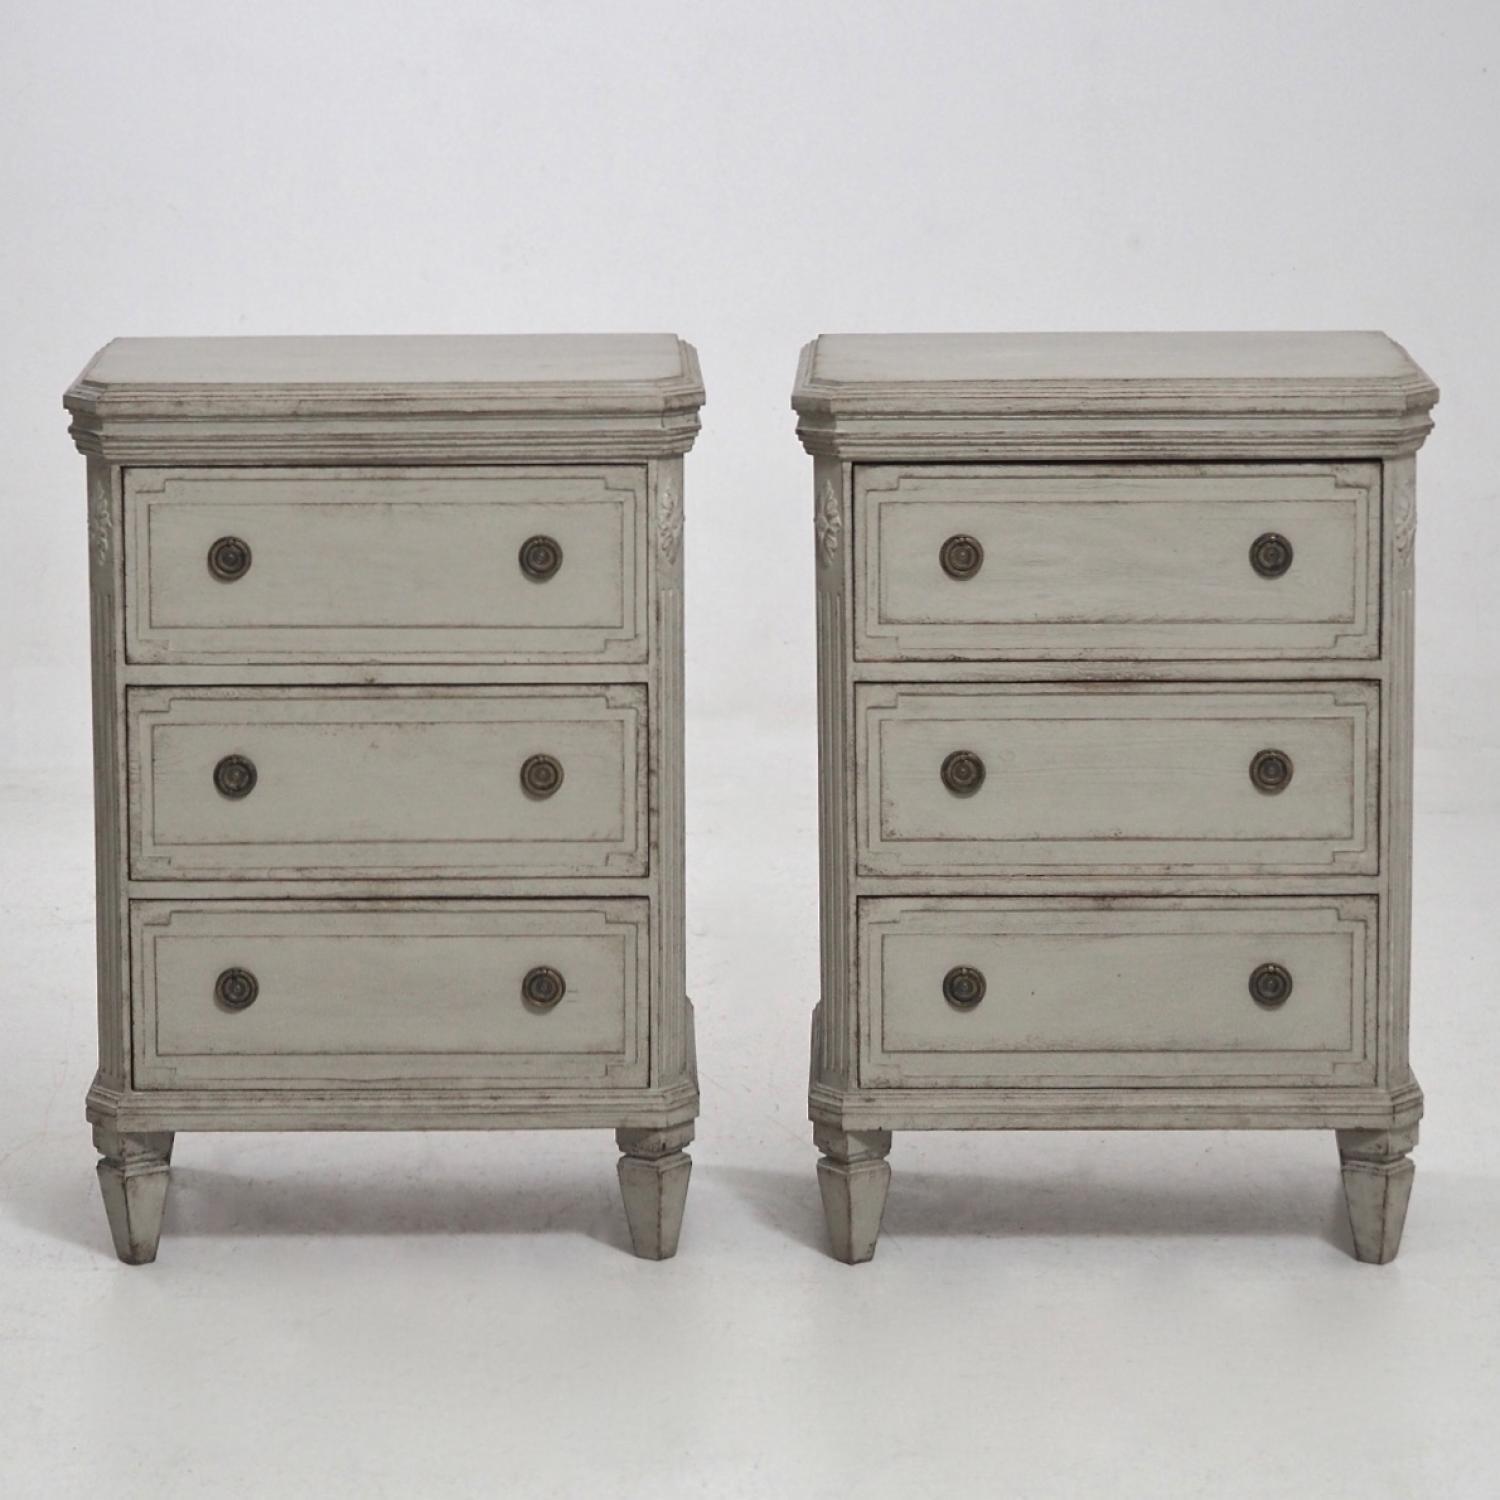 PAIR OF SWEDISH GUSTAVIAN STYLE CHESTS